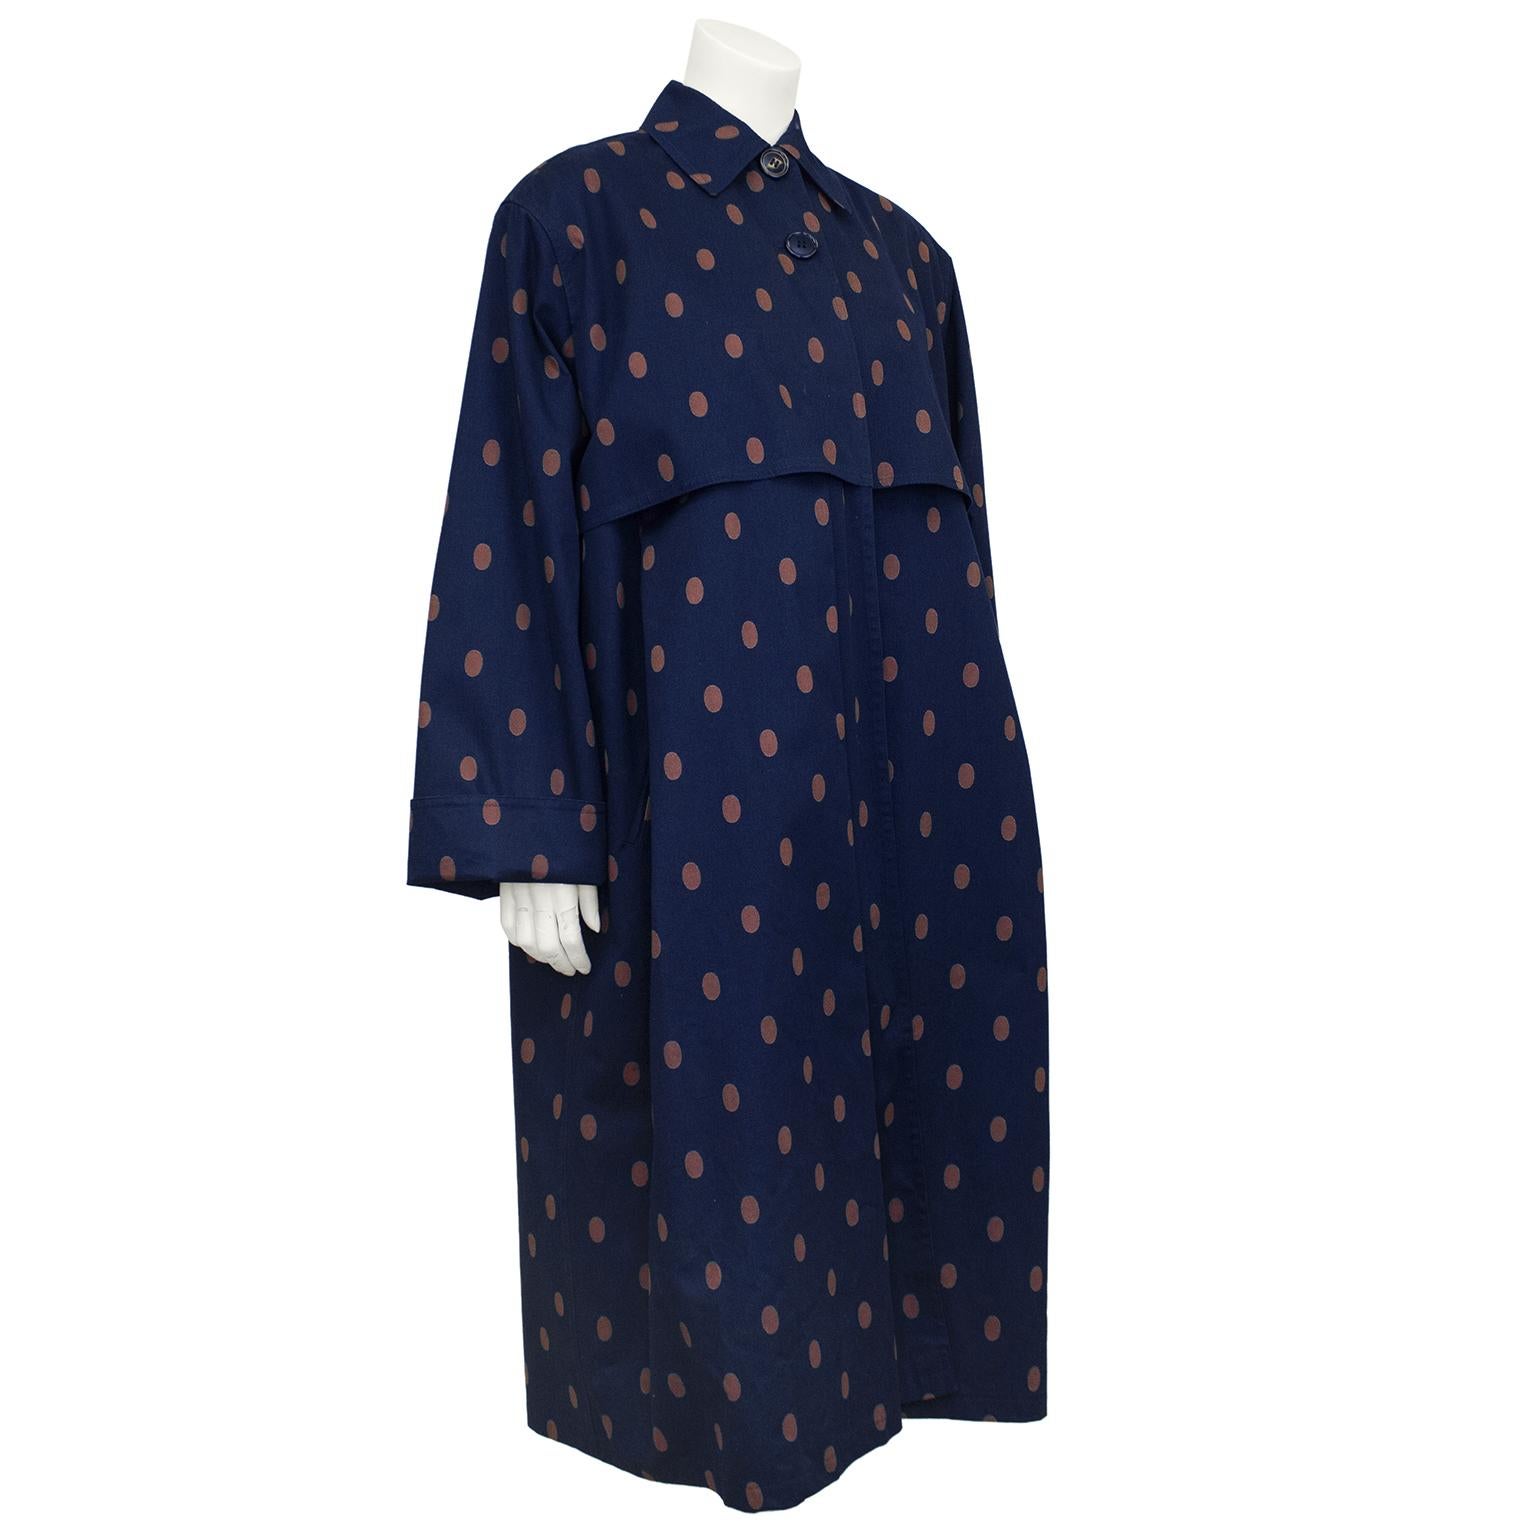 Gianfranco Ferre navy blue and brown oval polka dot oversize coat. Swing style with two buttons at neck and the bottom lays open. Cotton. Beautiful draping. Perfect for spring and early fall. Excellent vintage condition. Fits s US size 6-14. Made in